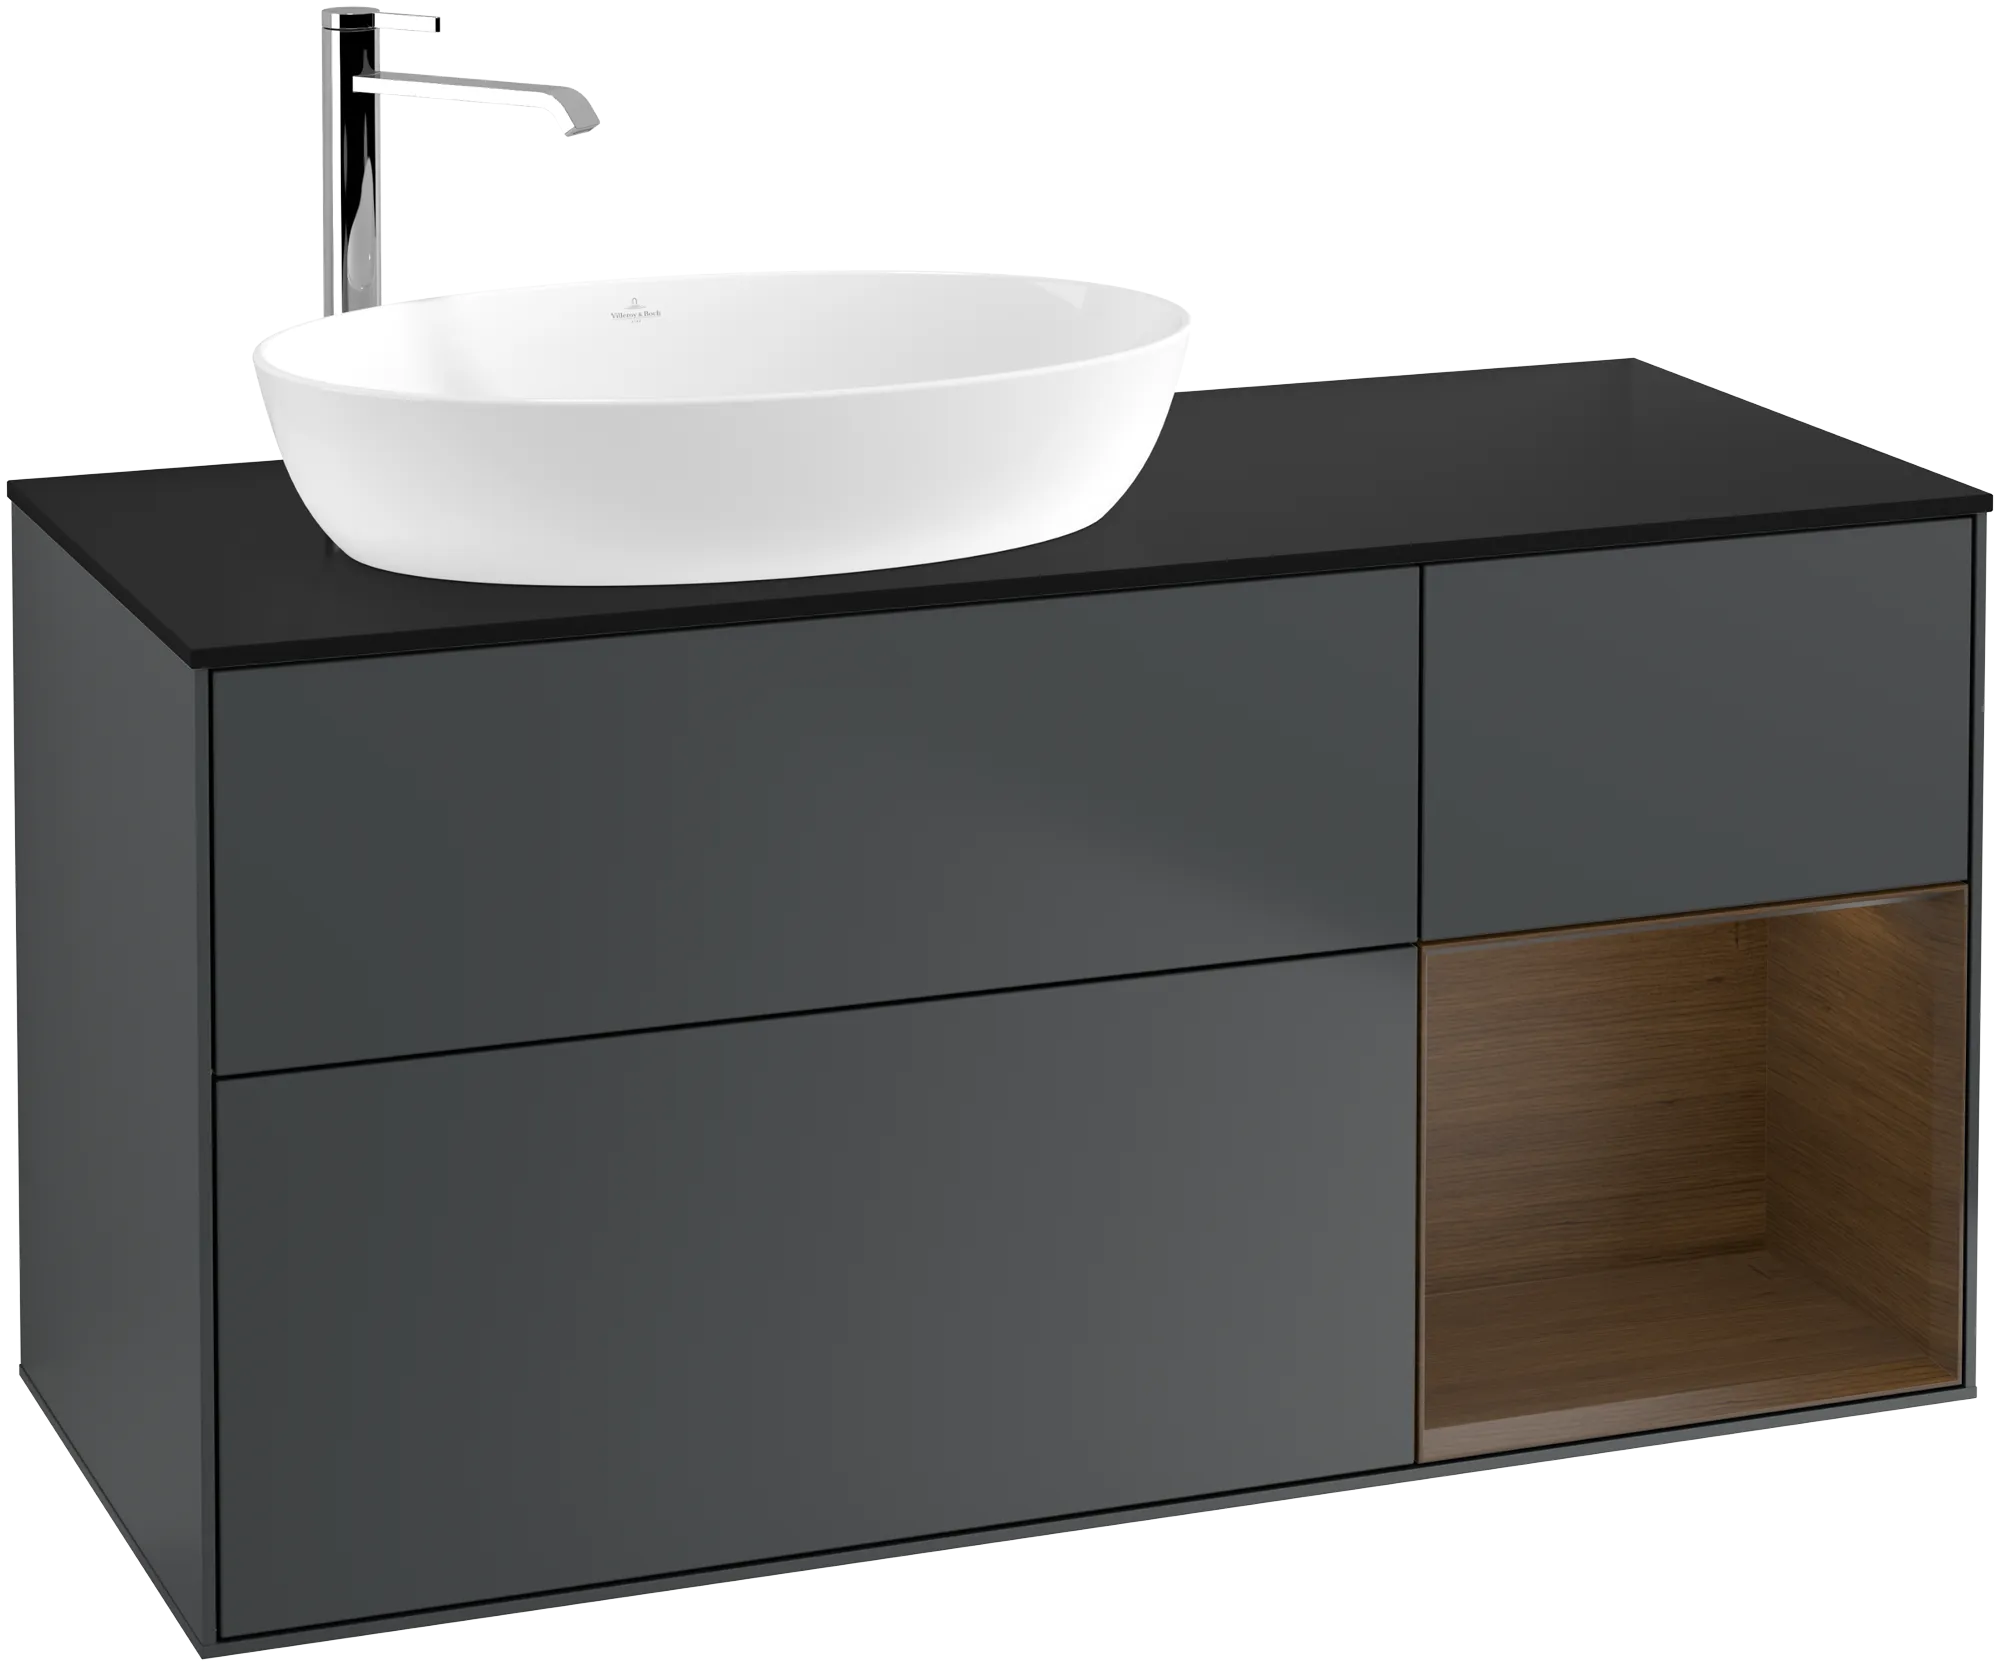 Picture of VILLEROY BOCH Finion Vanity unit, with lighting, 3 pull-out compartments, 1200 x 603 x 501 mm, Midnight Blue Matt Lacquer / Walnut Veneer / Glass Black Matt #G932GNHG